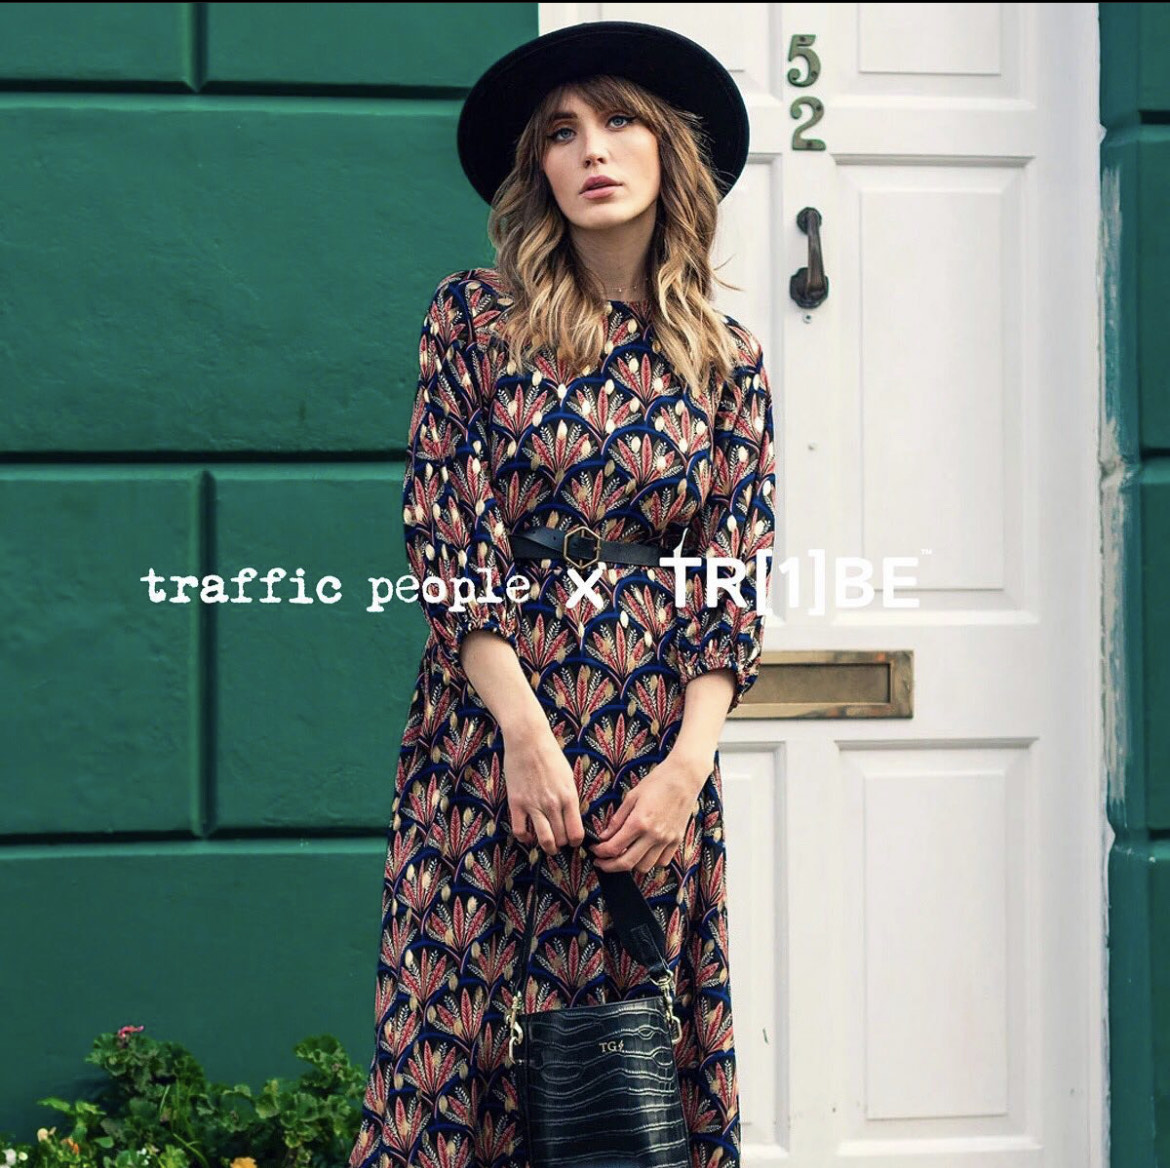 eco fashion brand Traffic people, woman standing in field wearing sustainable fashion